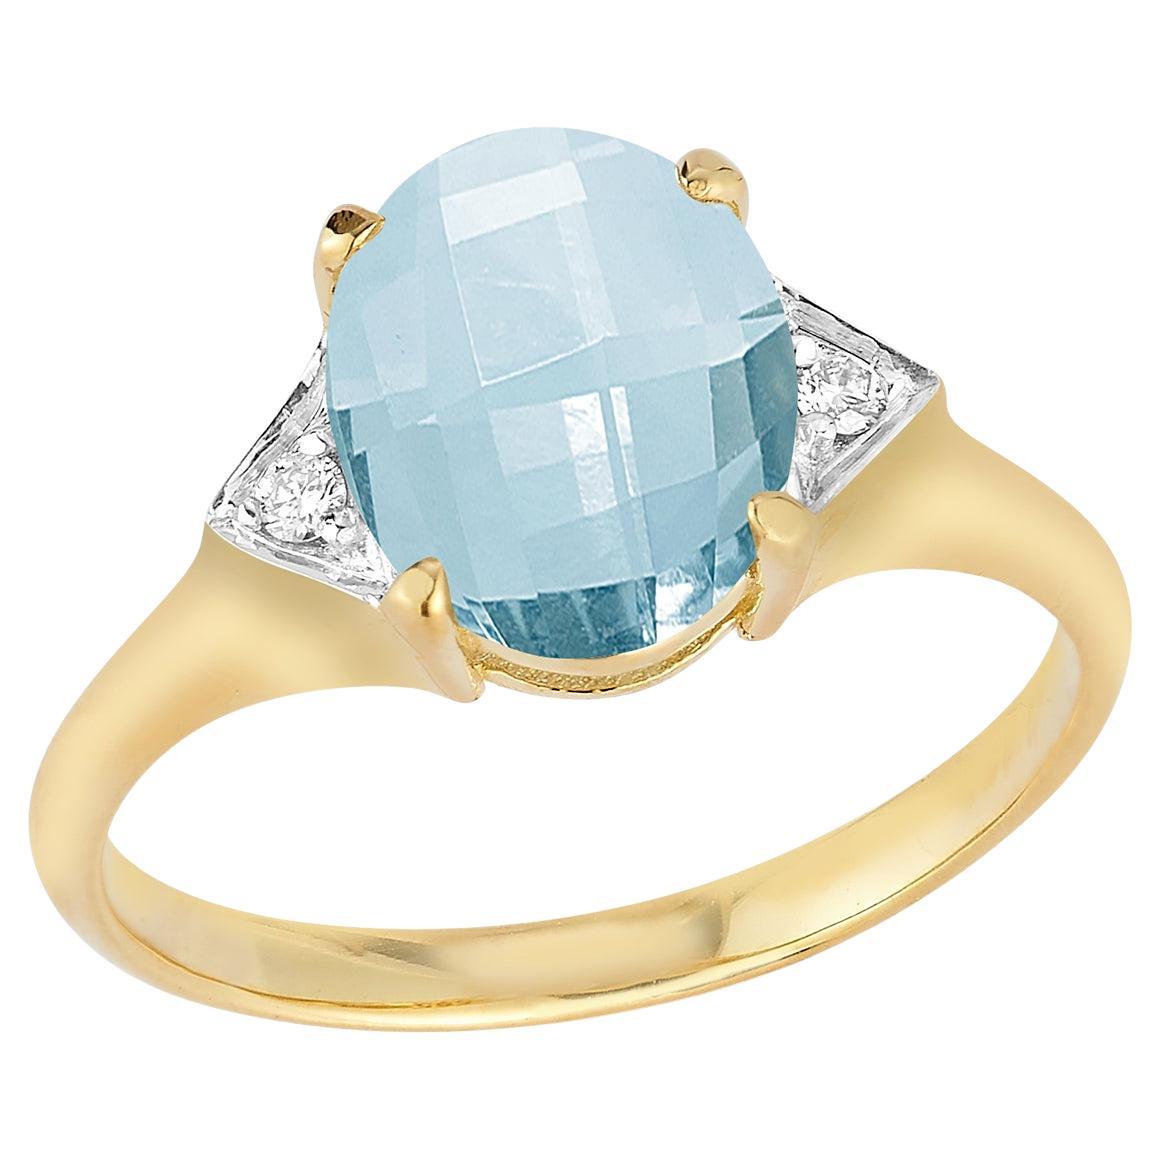 For Sale:  Hand-Crafted 14K Gold 0.05 ct. tw. Diamond & 6.8CT Blue Topaz Cocktail Ring